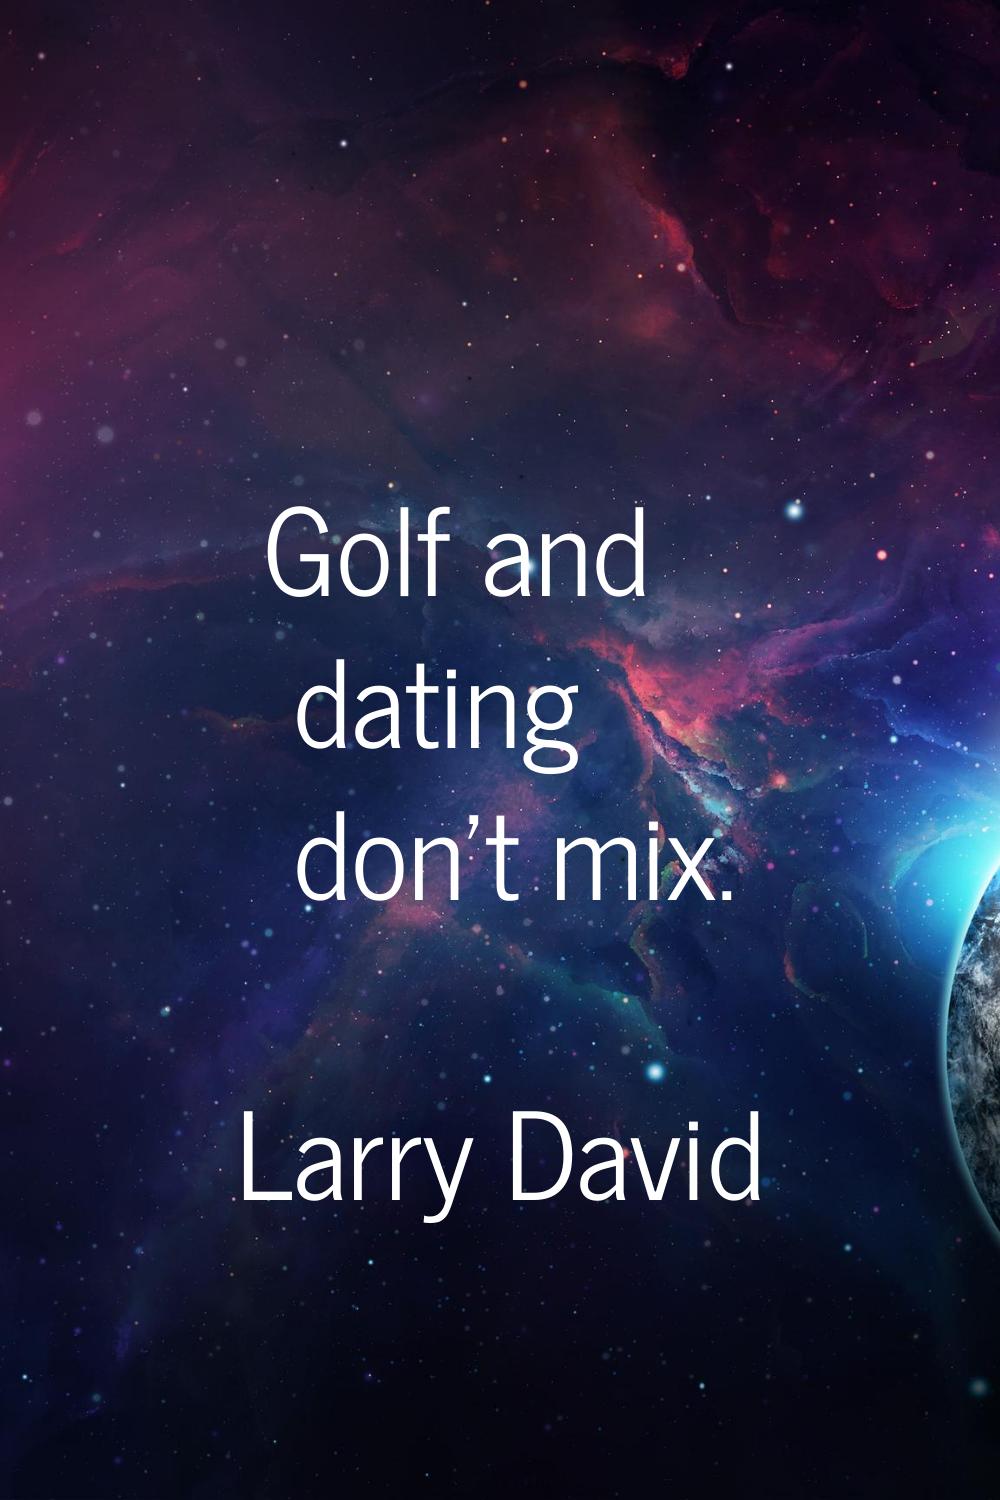 Golf and dating don't mix.